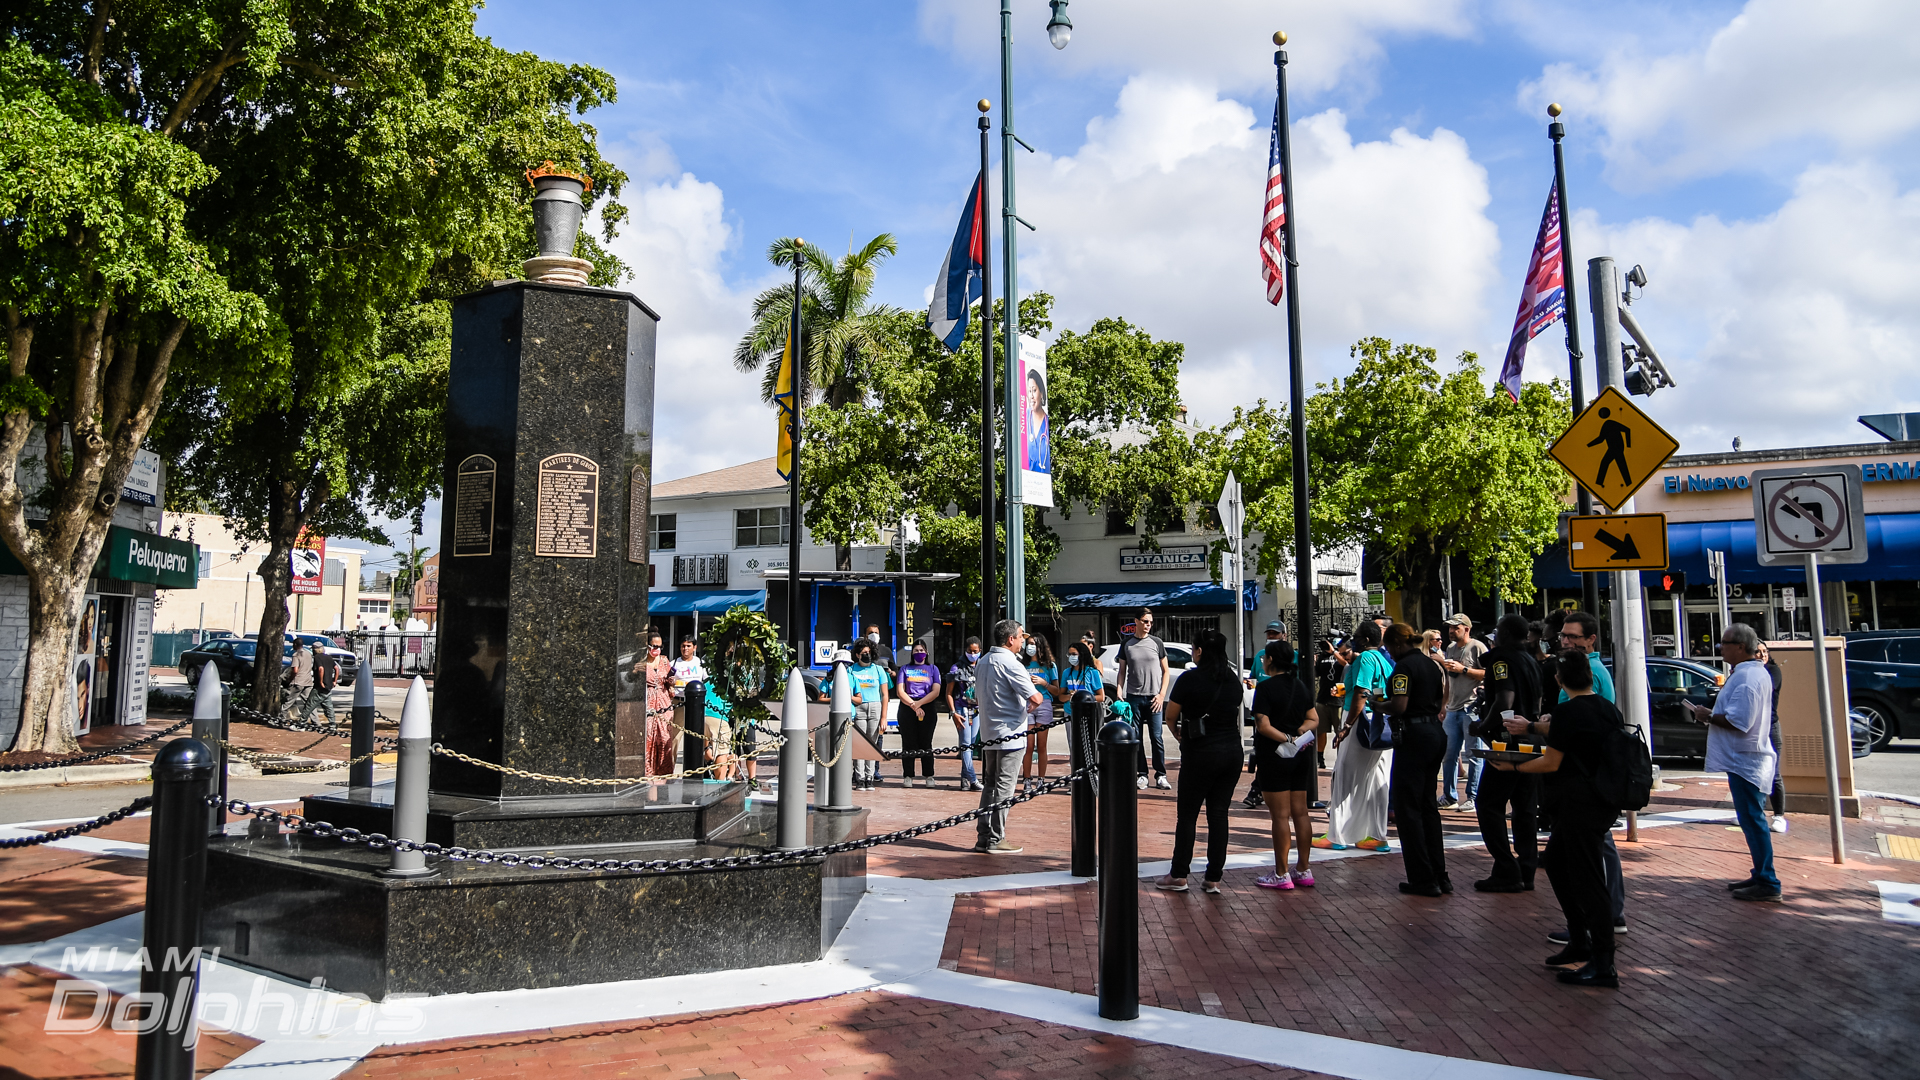 Bay Of Pigs Monument Tour